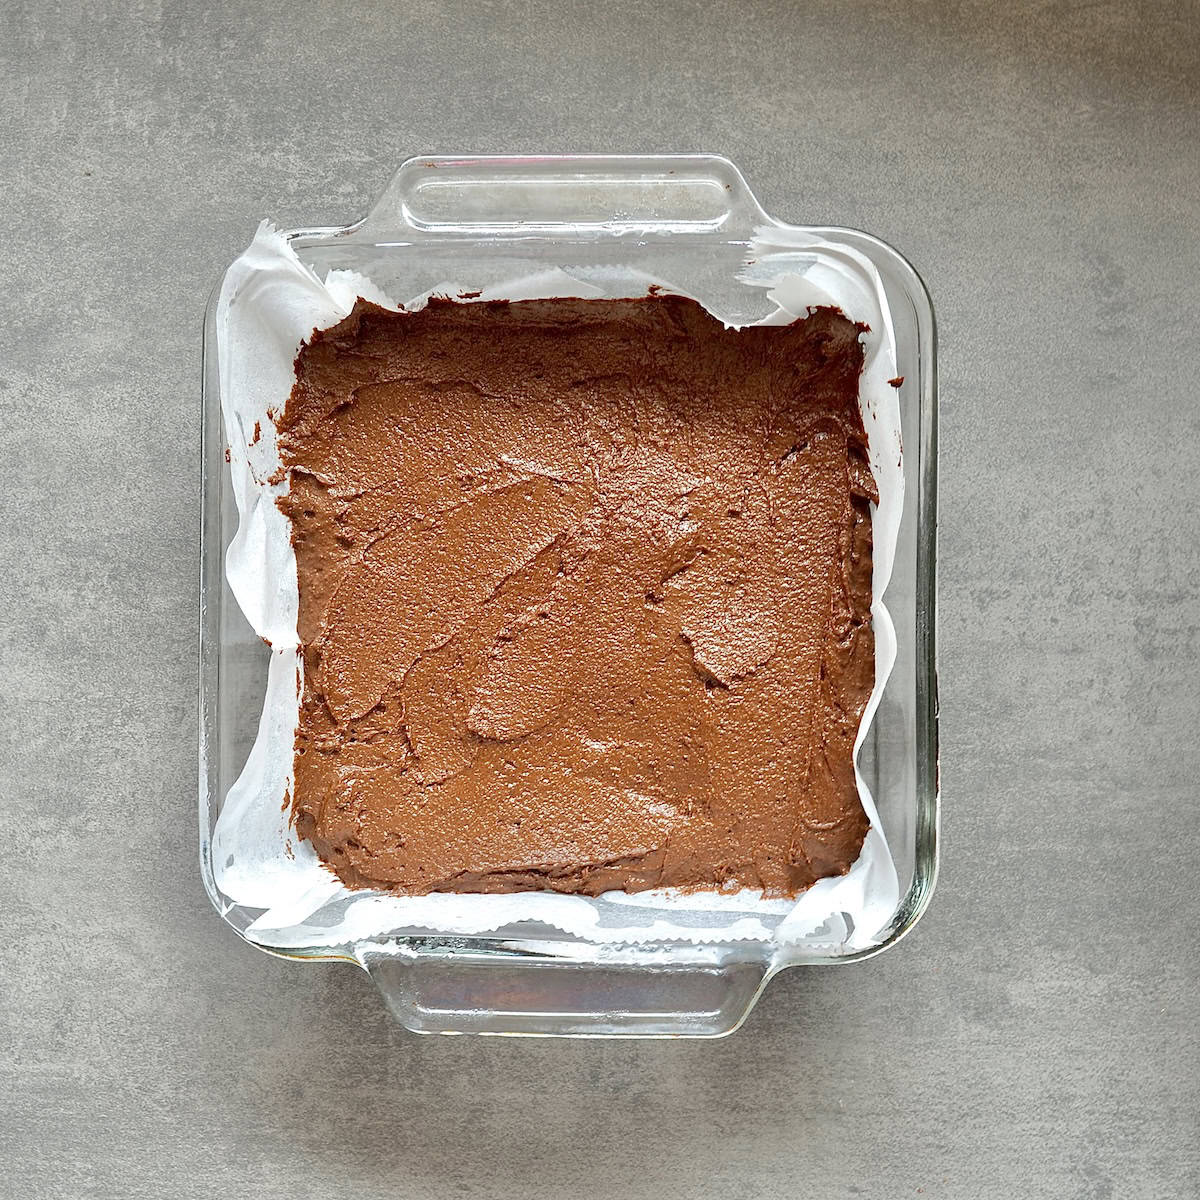 Chocolate brownie batter in a baking dish